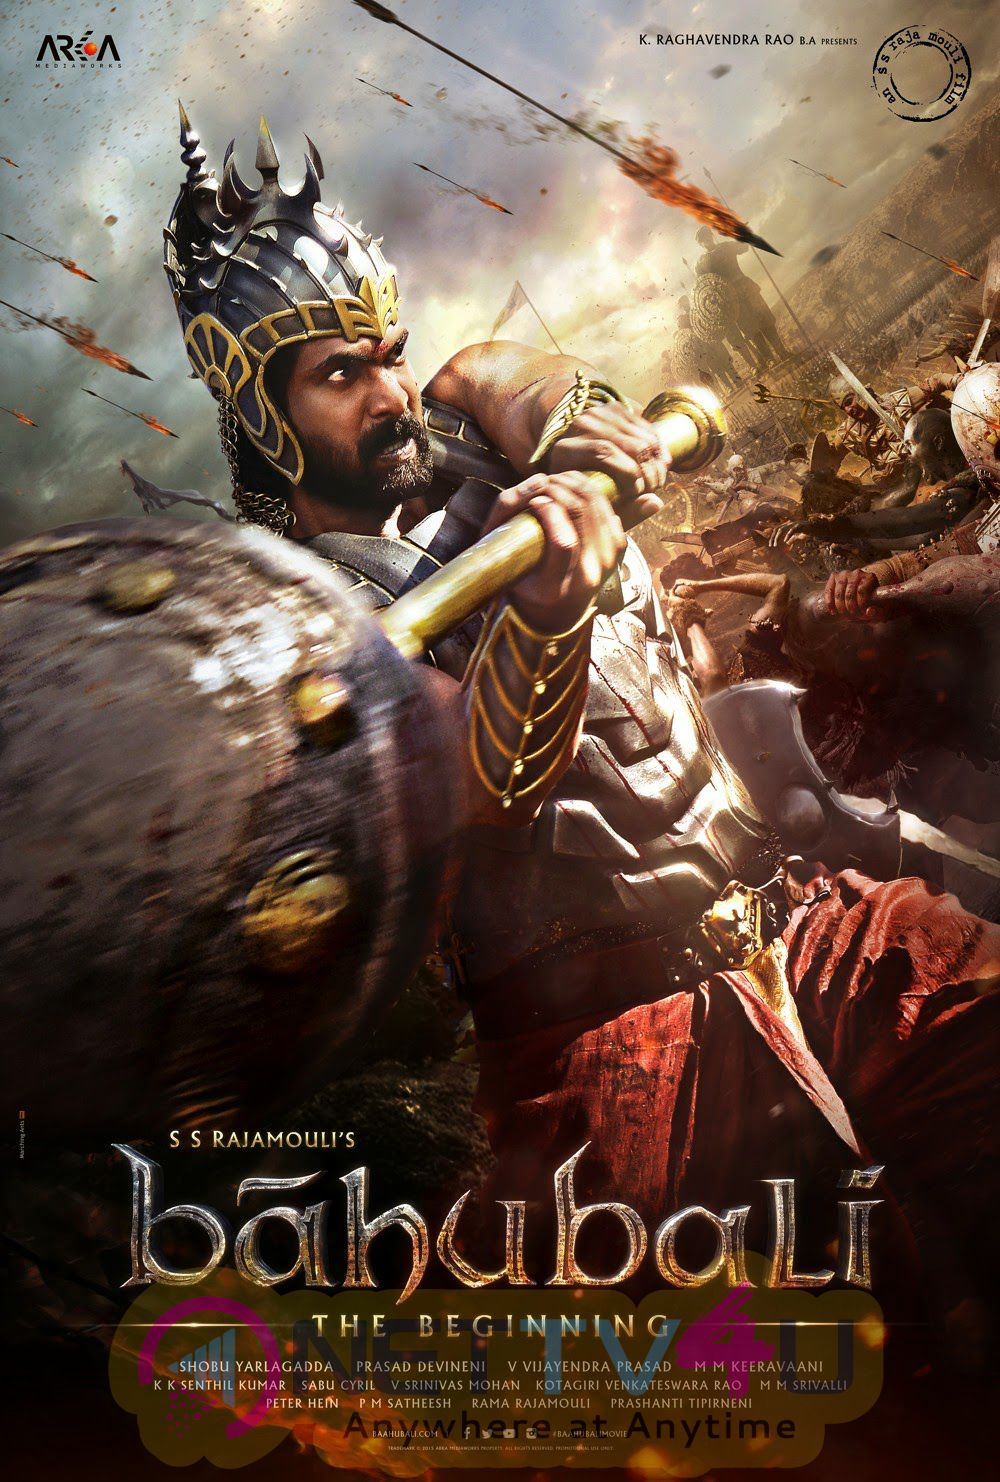 wallpapers and posters for baahubali bolywood movie 30 days  3